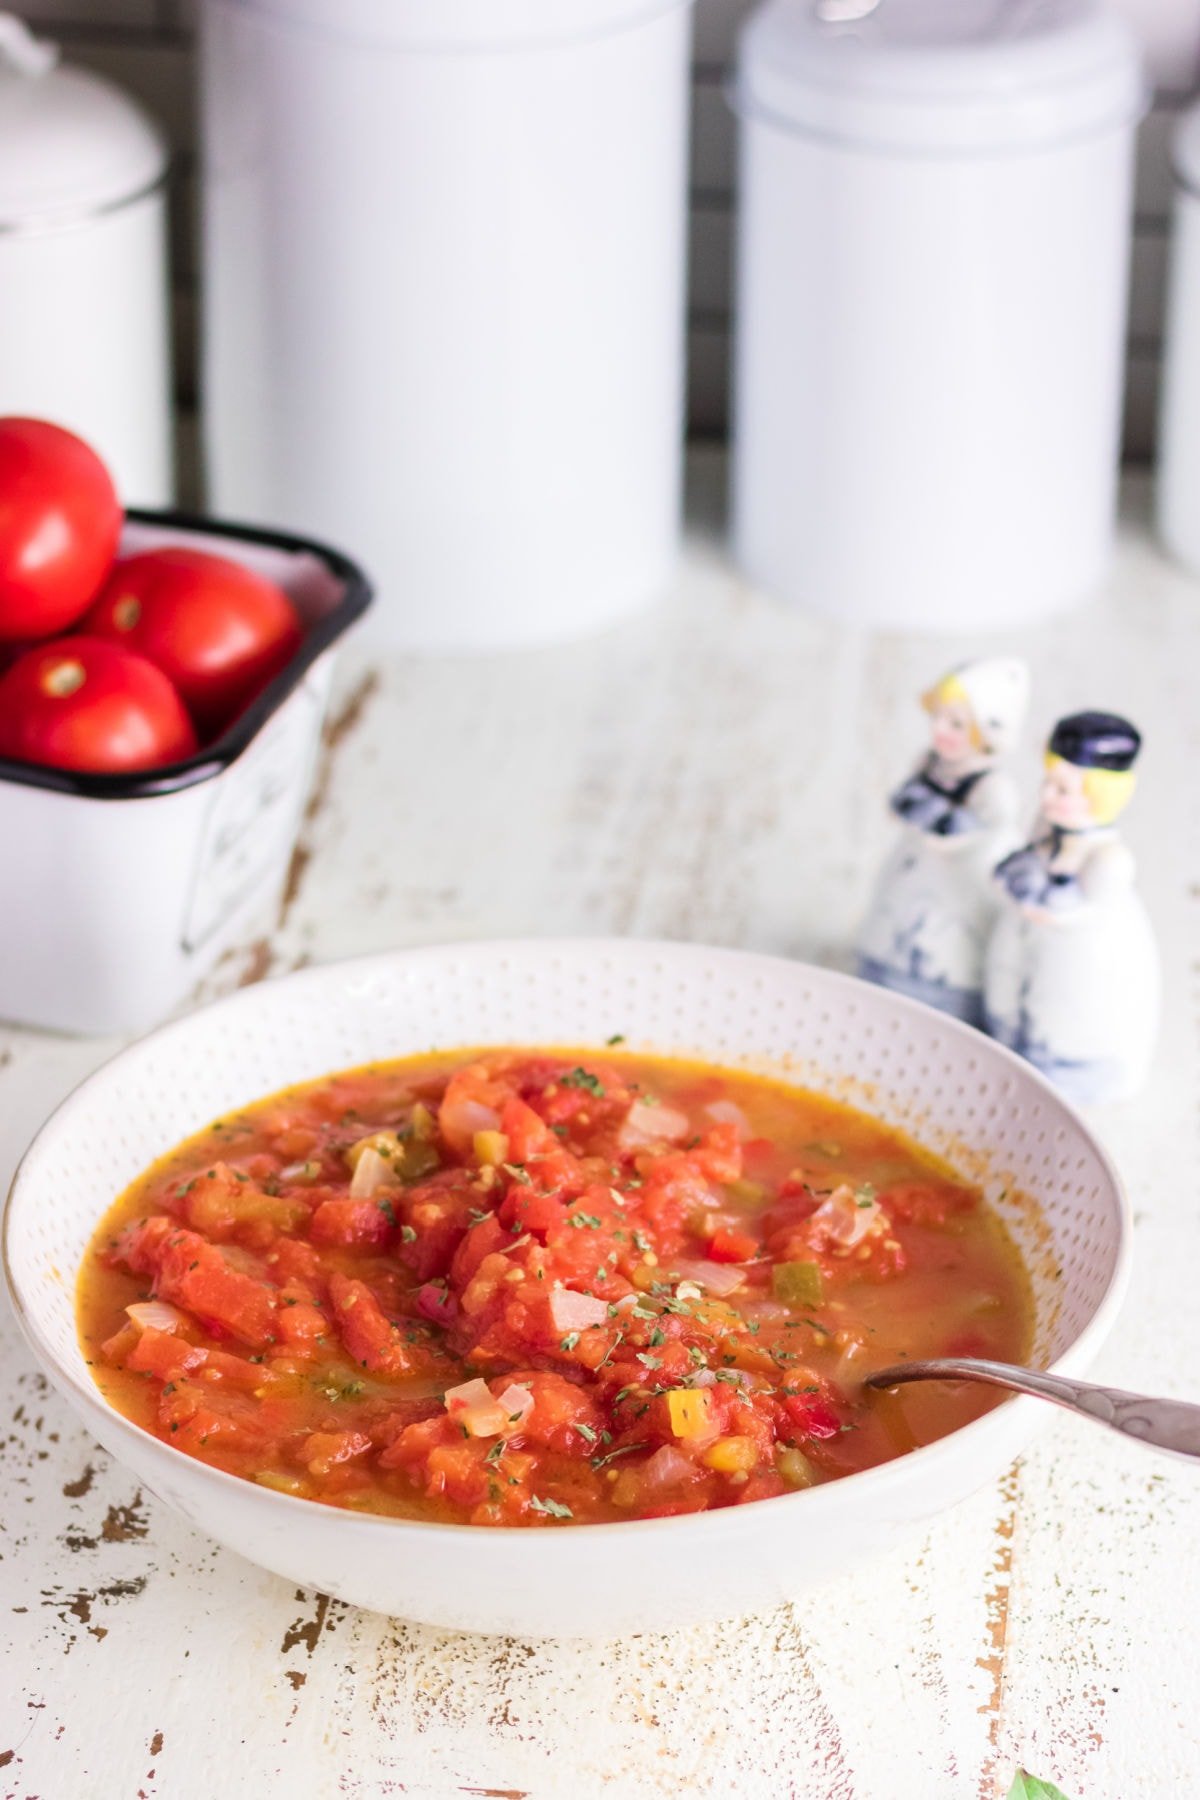 A bowl of stewed tomatoes on a white wooden counter.